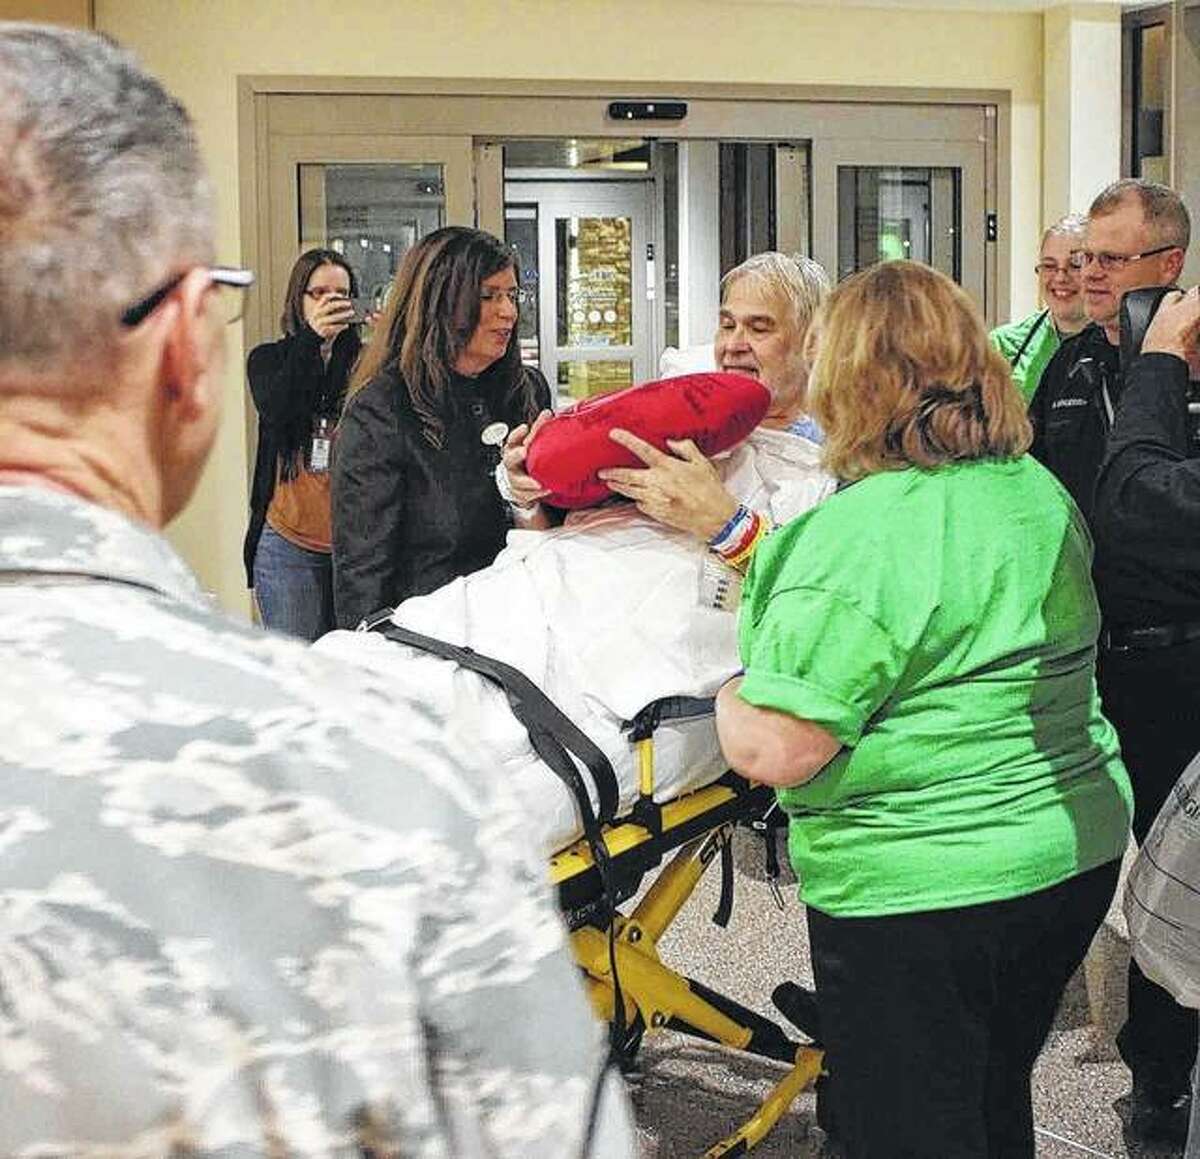 Daniel Thelen of Belleville was pleased to be the first patient admitted to the new HSHS St. Elizabeth’s Hospital in O’Fallon. He is surrounded by HSHS St. Elizabeth’s clinical staff and Scott Air Force Base personnel assisting with the move.